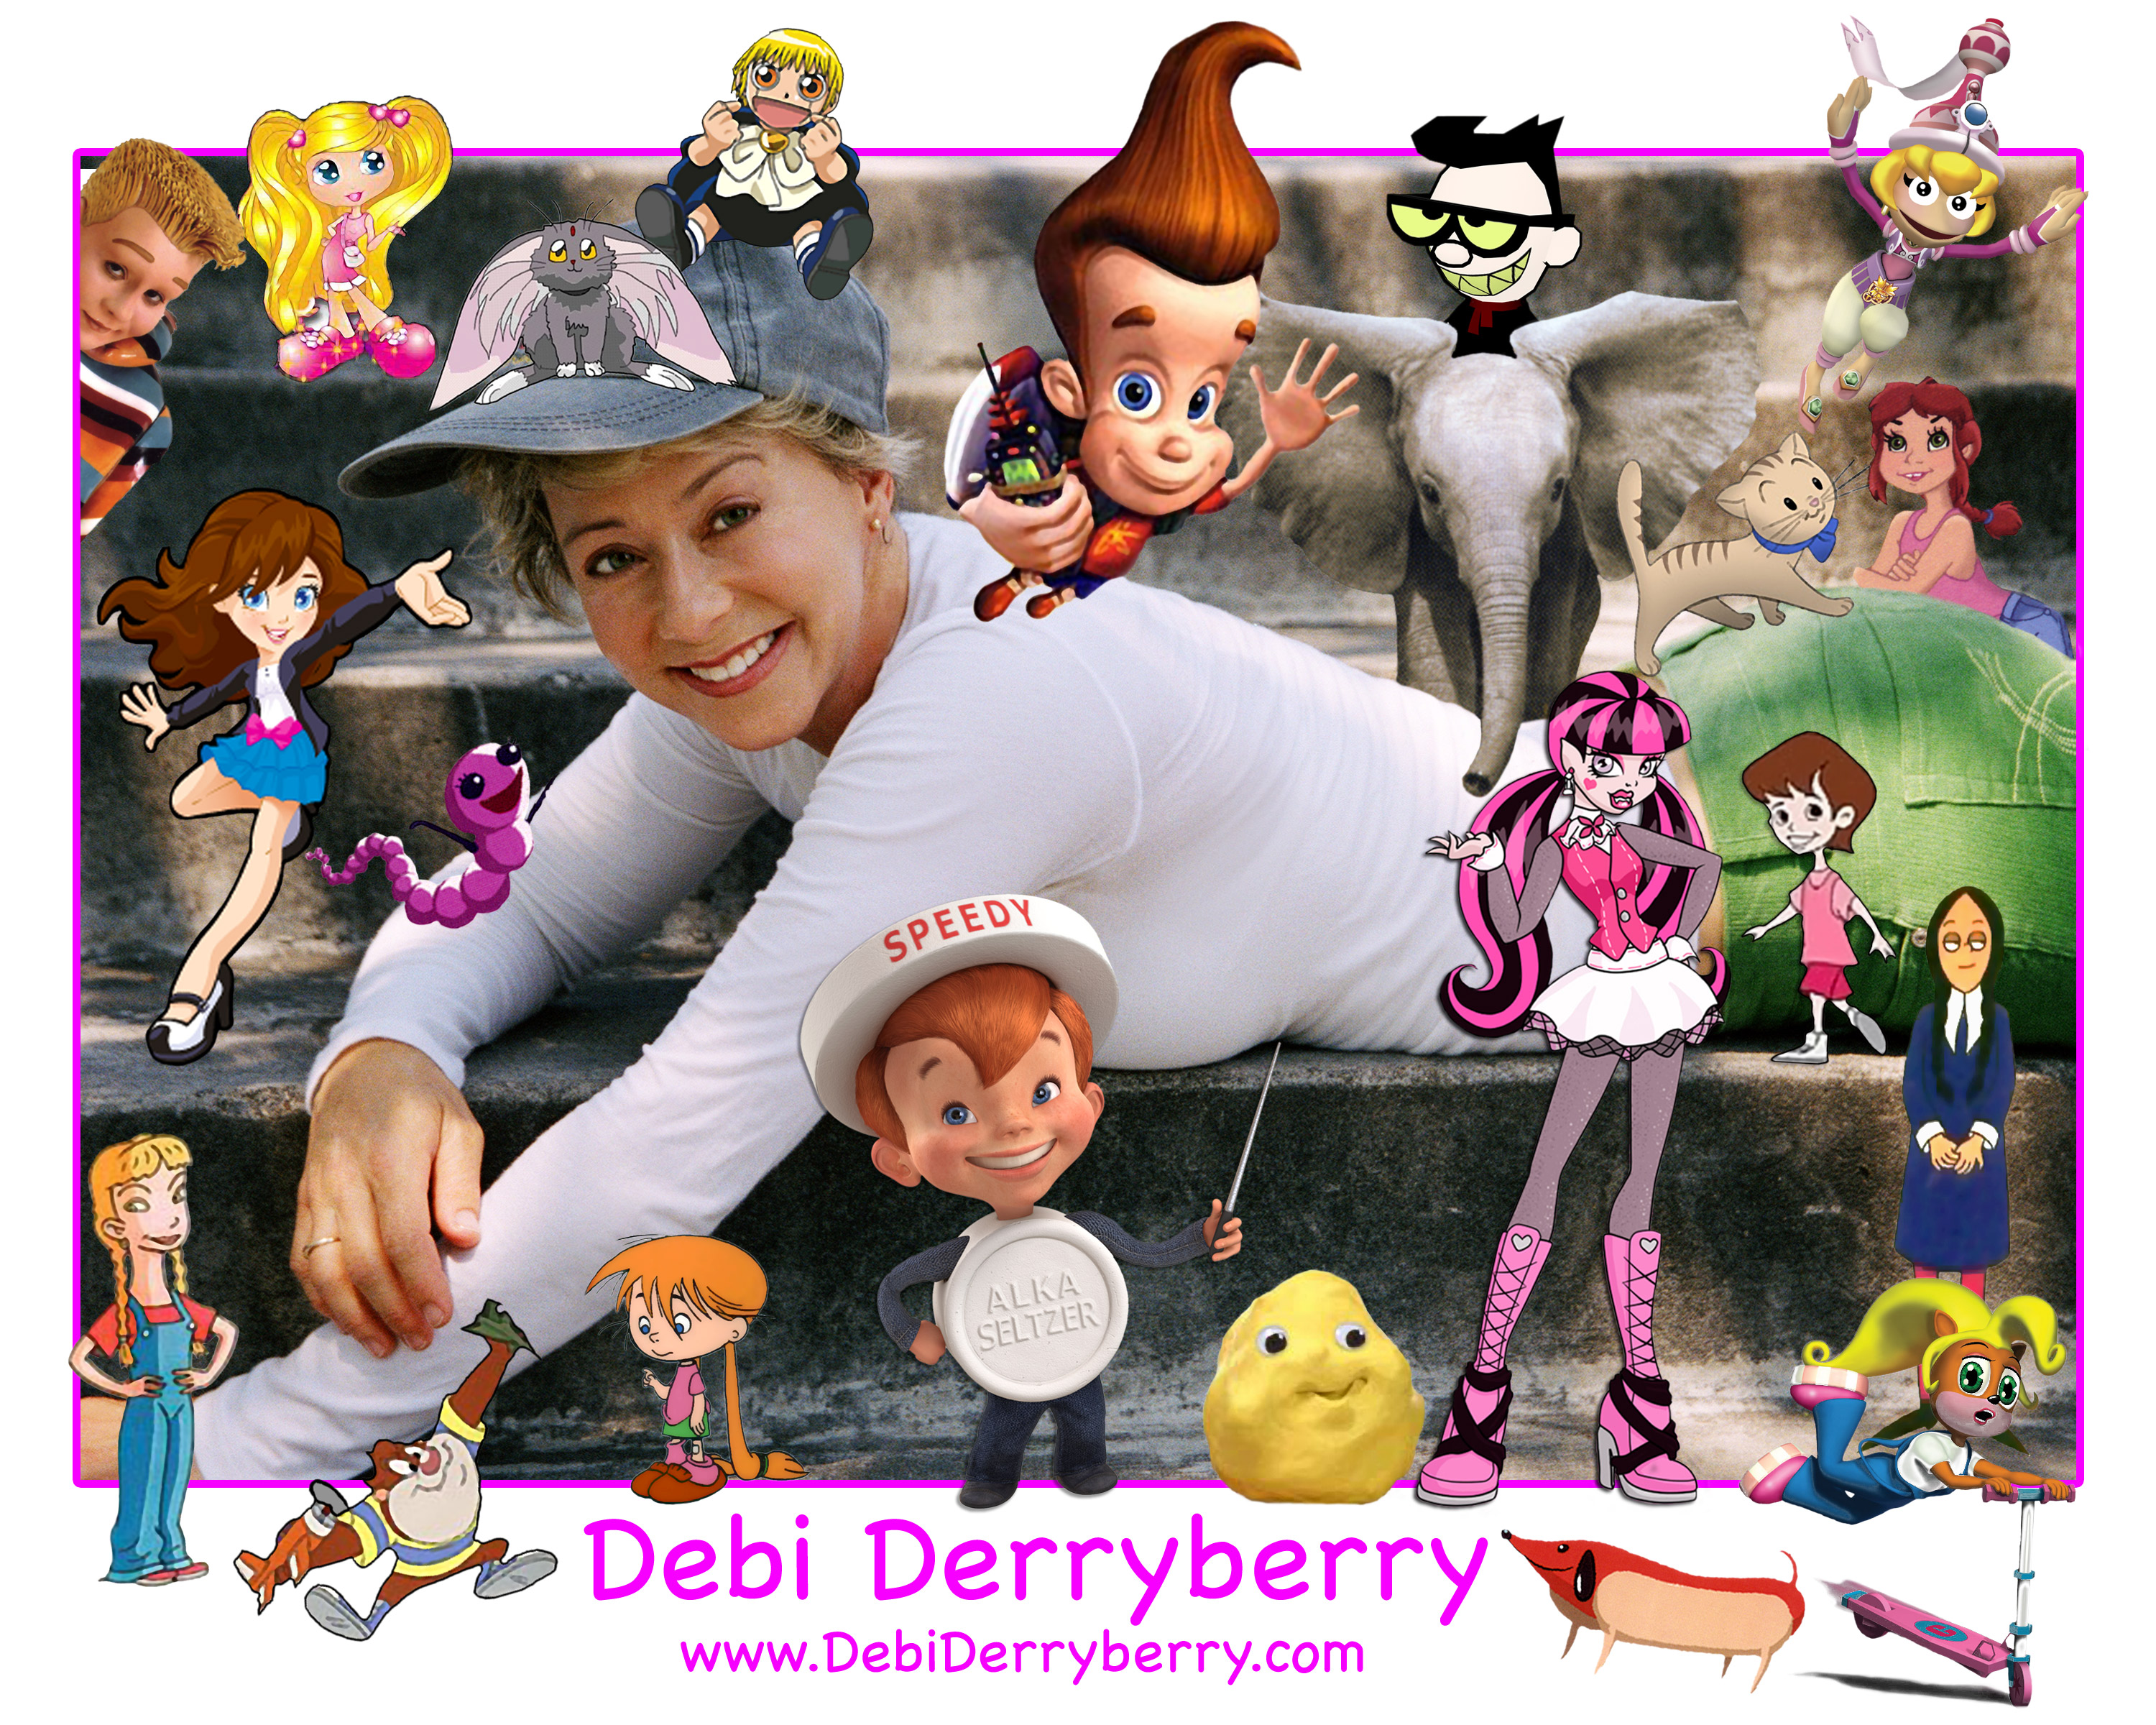 Debi and Characters She has Voiced